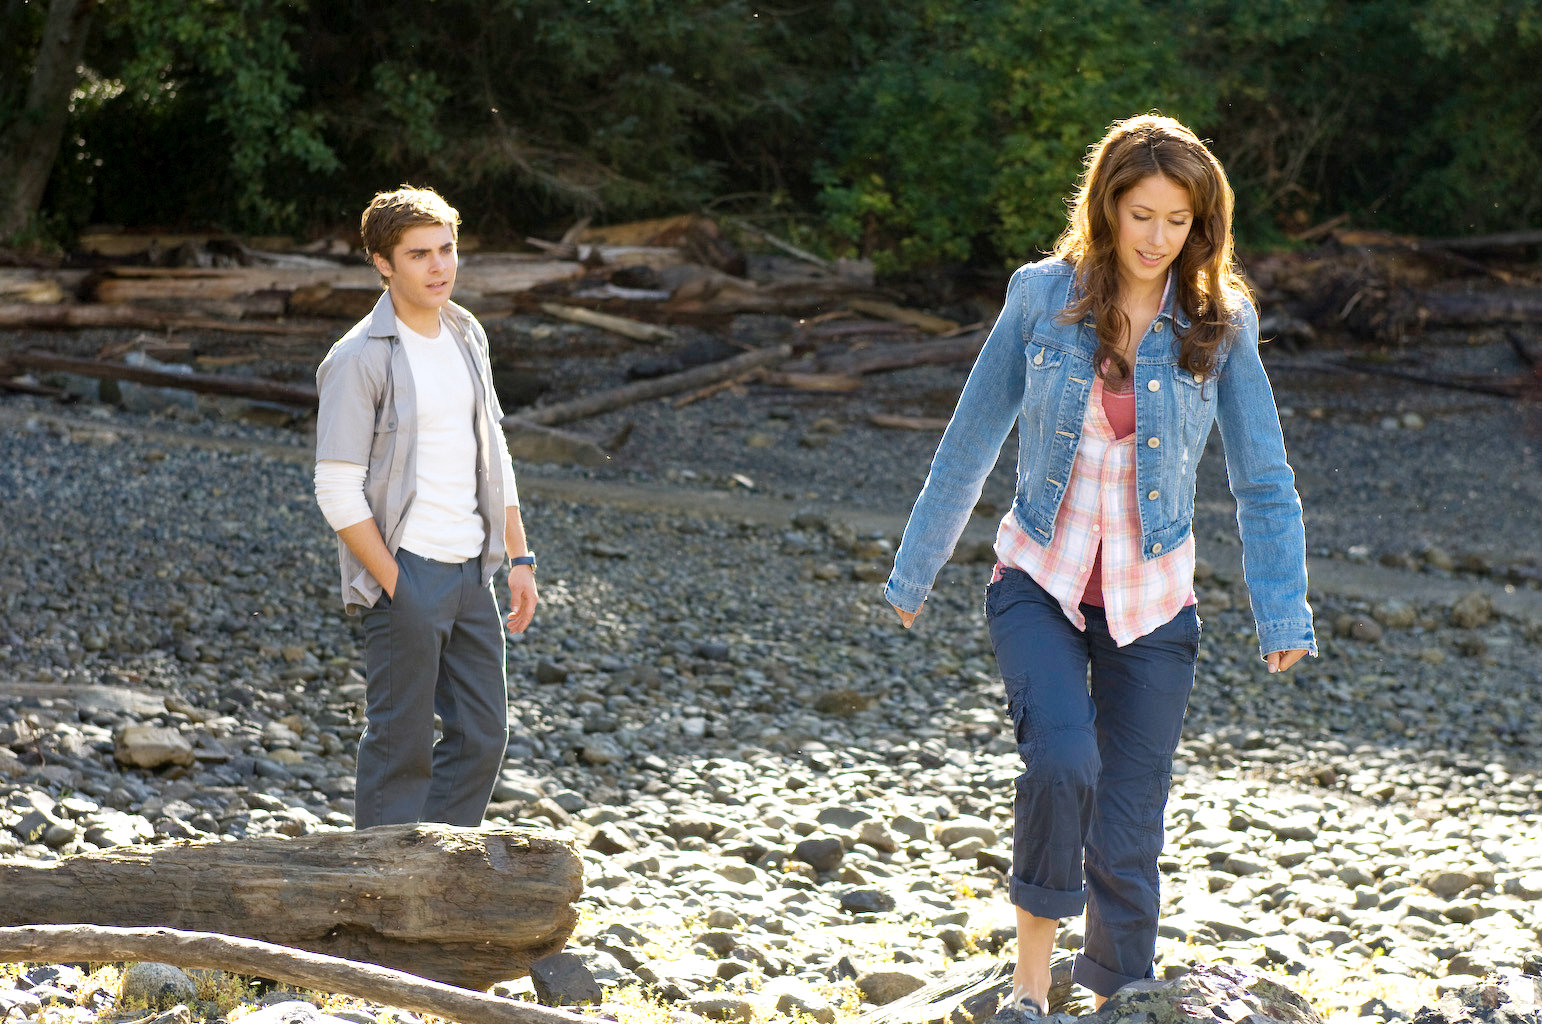  Zac Efron stars as Charlie St. Cloud and Amanda Crew stars as Tess Carroll in Universal Pictures' &quot;Charlie St. Cloud&quot;.